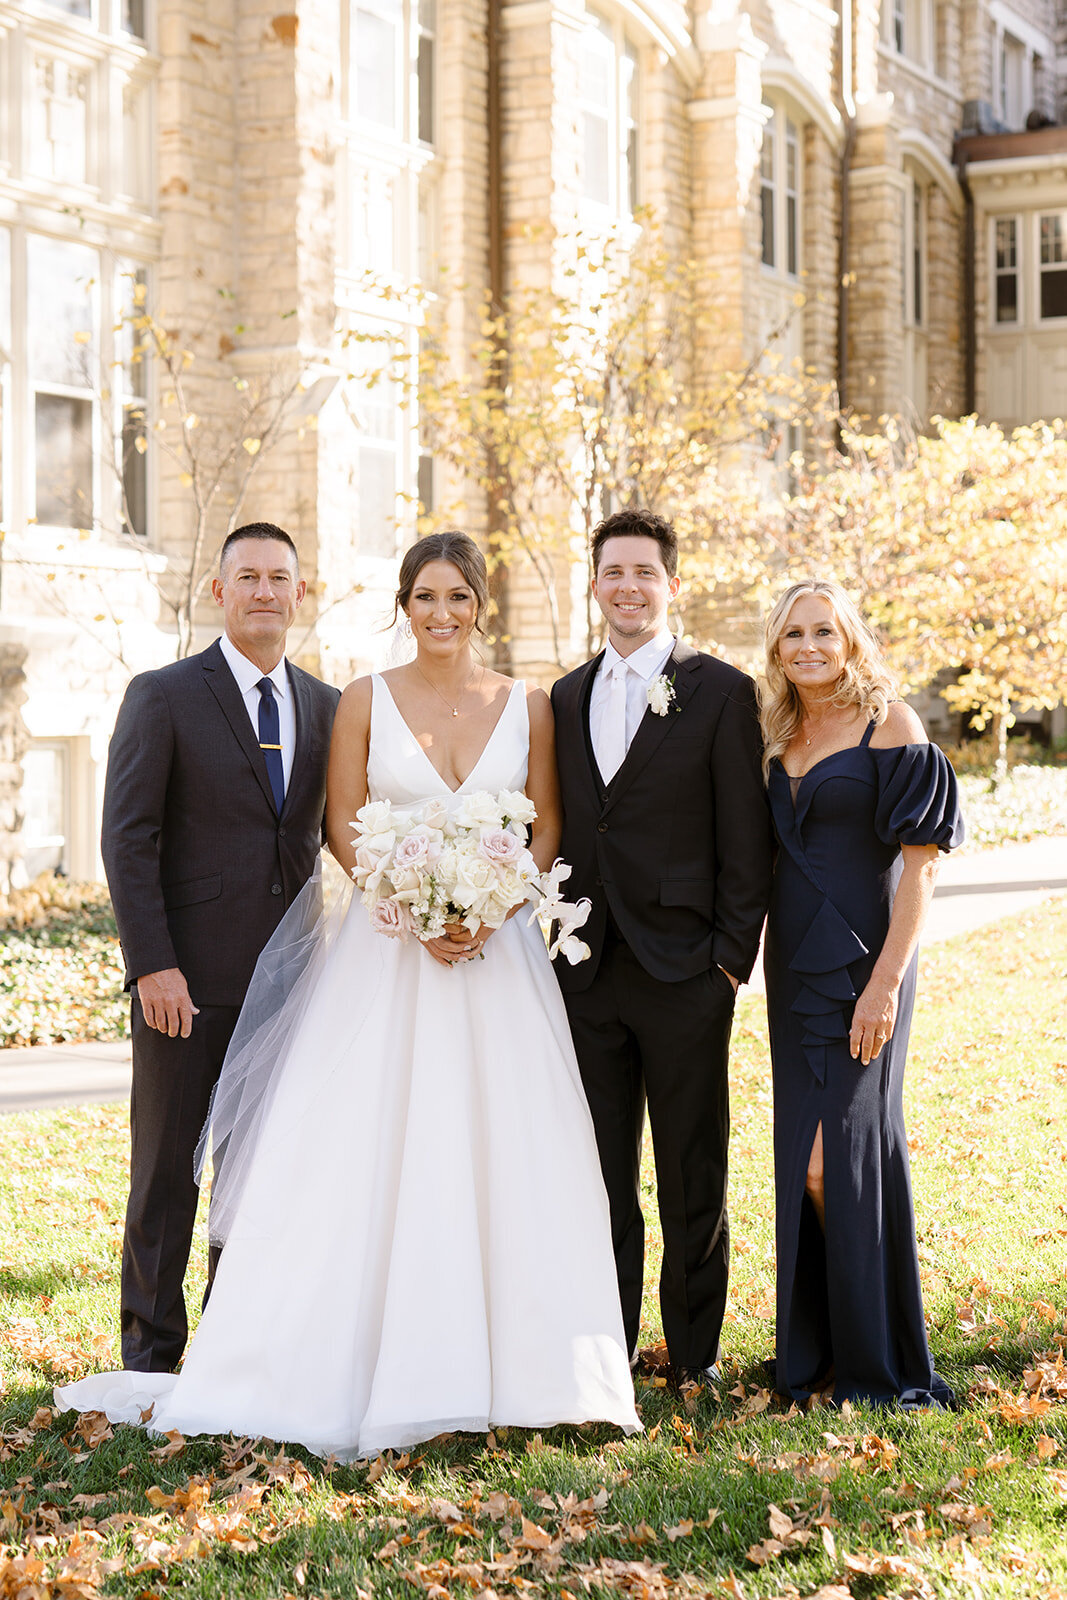 Kylie and Jack at The Grand Hall - Kansas City Wedding Photograpy - Nick and Lexie Photo Film-522